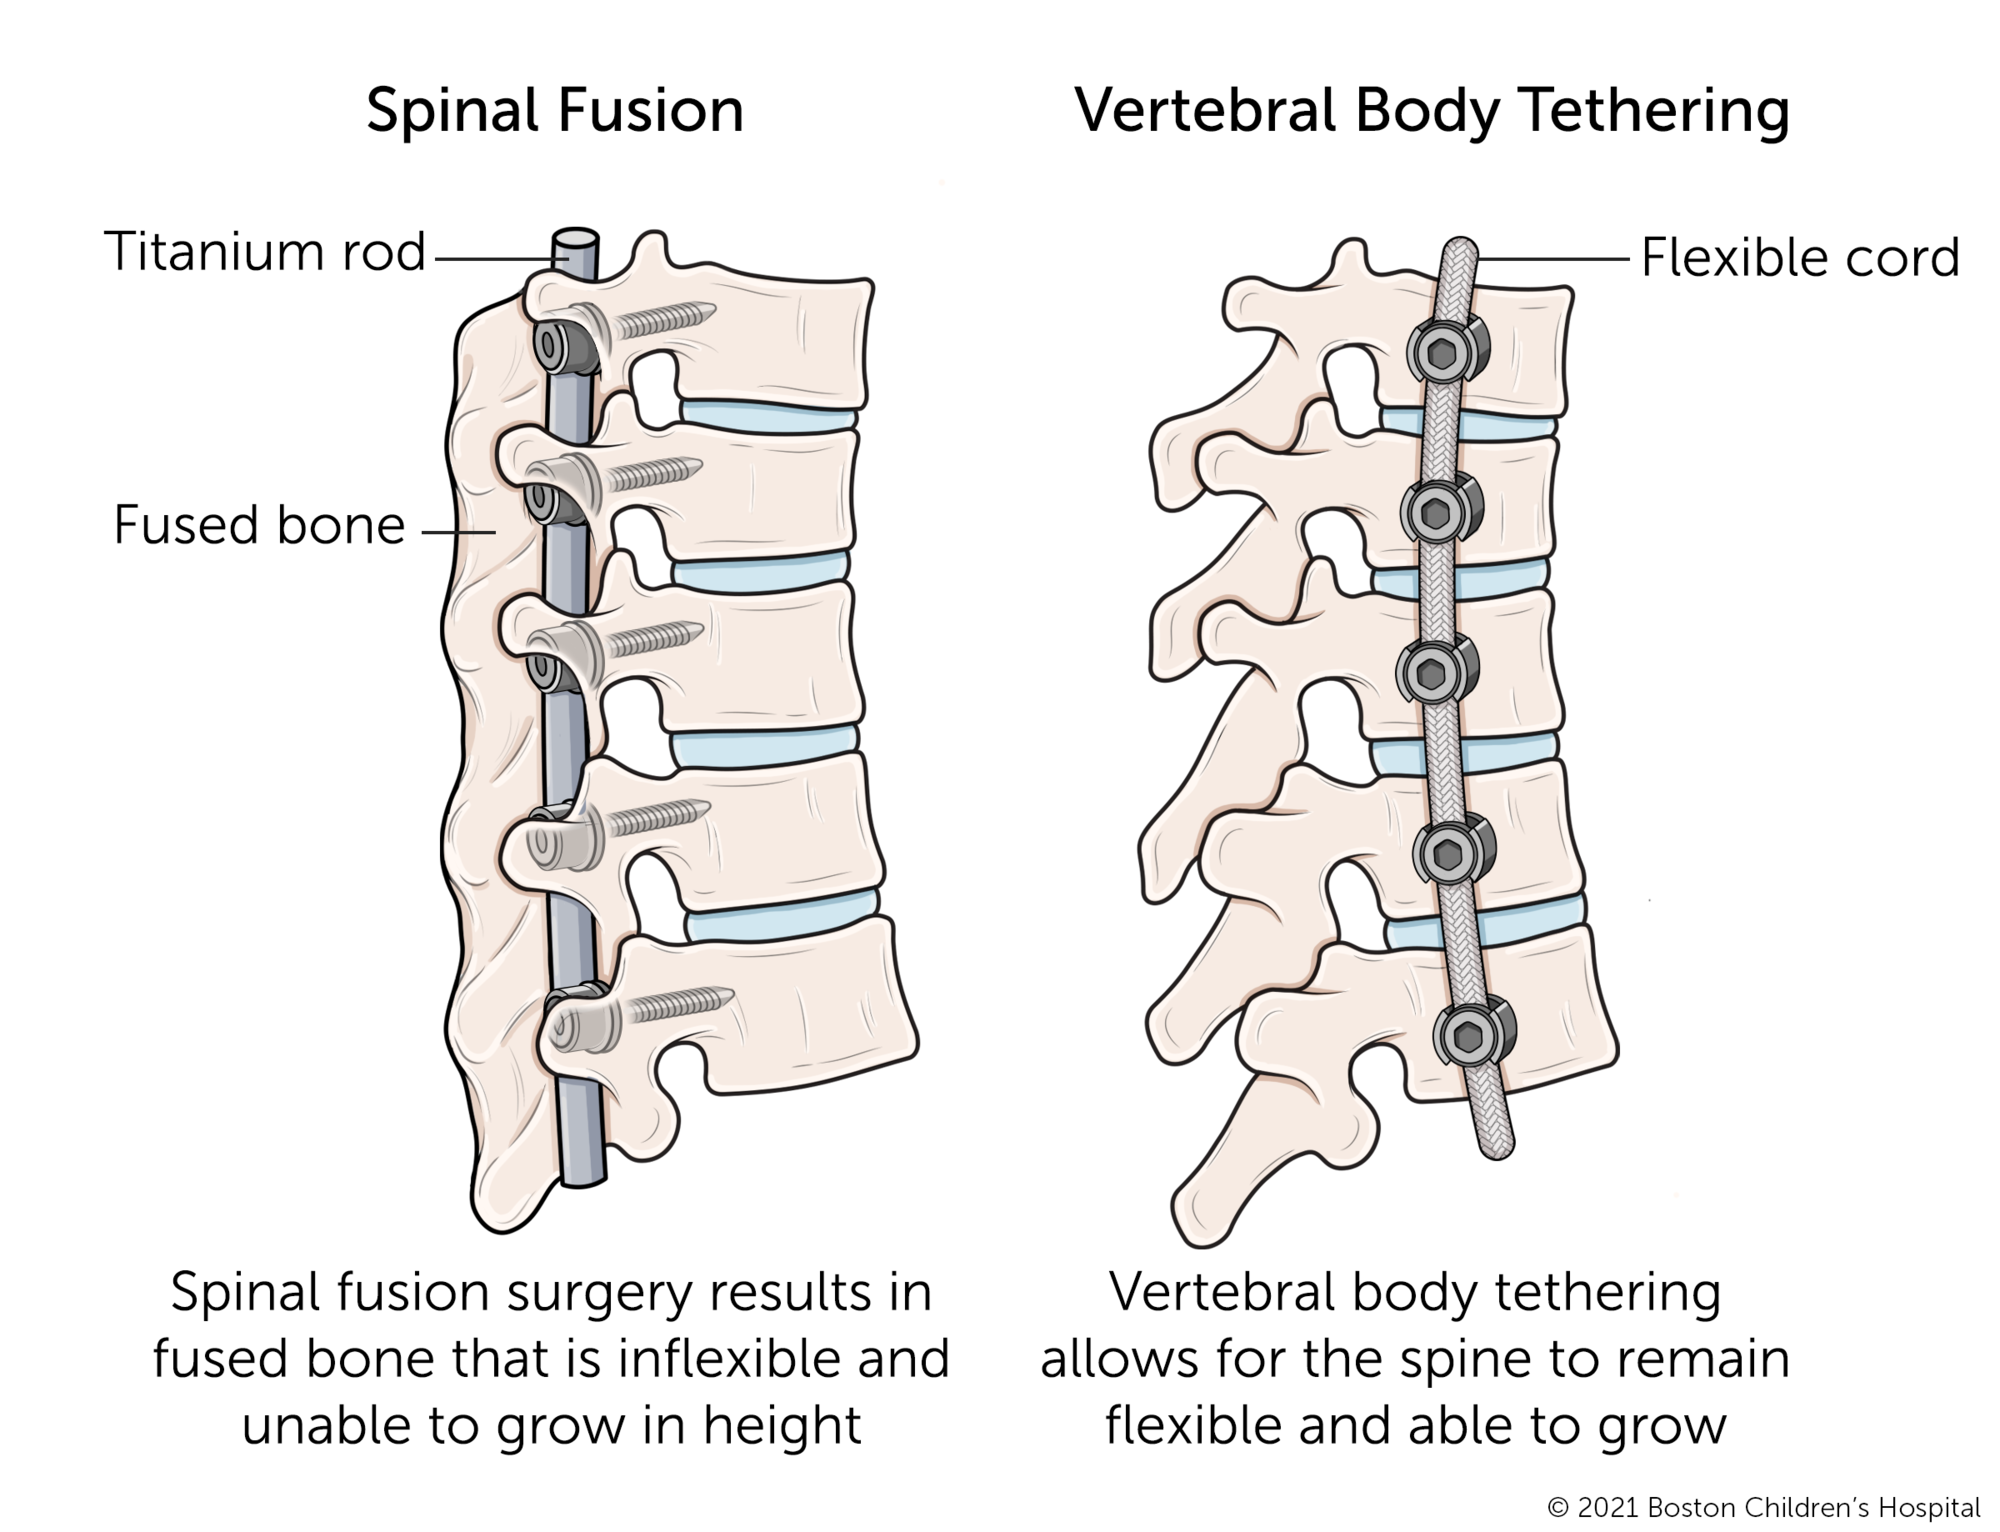 Spinal fusion compared to vertebral body tethering. Spinal fusion surgery results in fused bone that is inflexible and unable to grow in height. Vertebral body tethering allows for the spine to remain flexible and able to grow. 